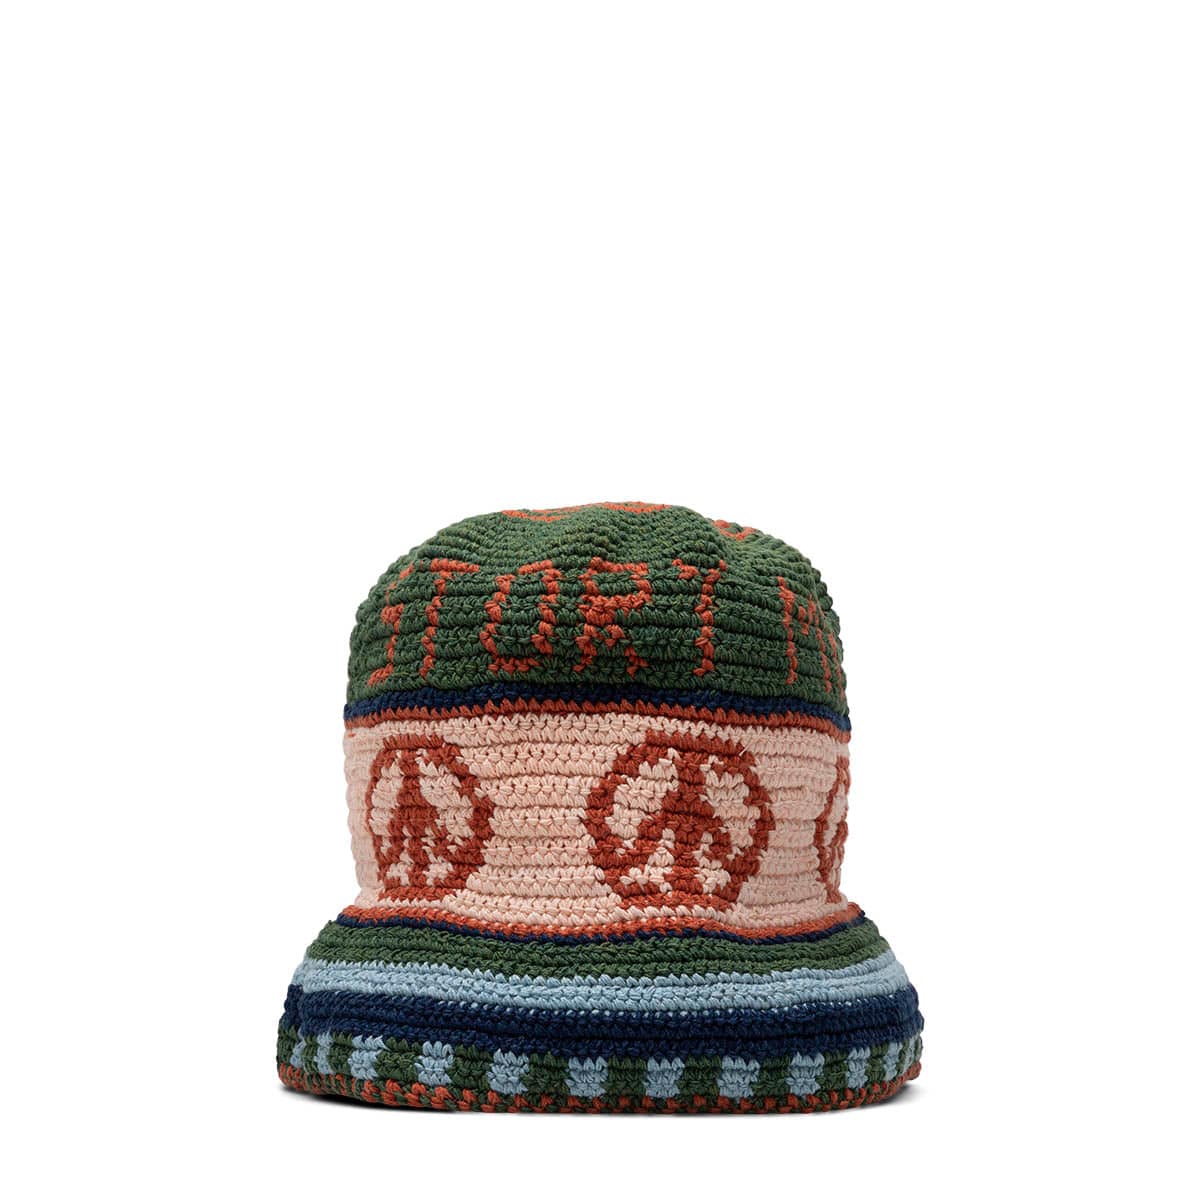 STORY mfg. Headwear FOREST PEACE POWER / O/S FOREST PEACE POWER BREW HAT